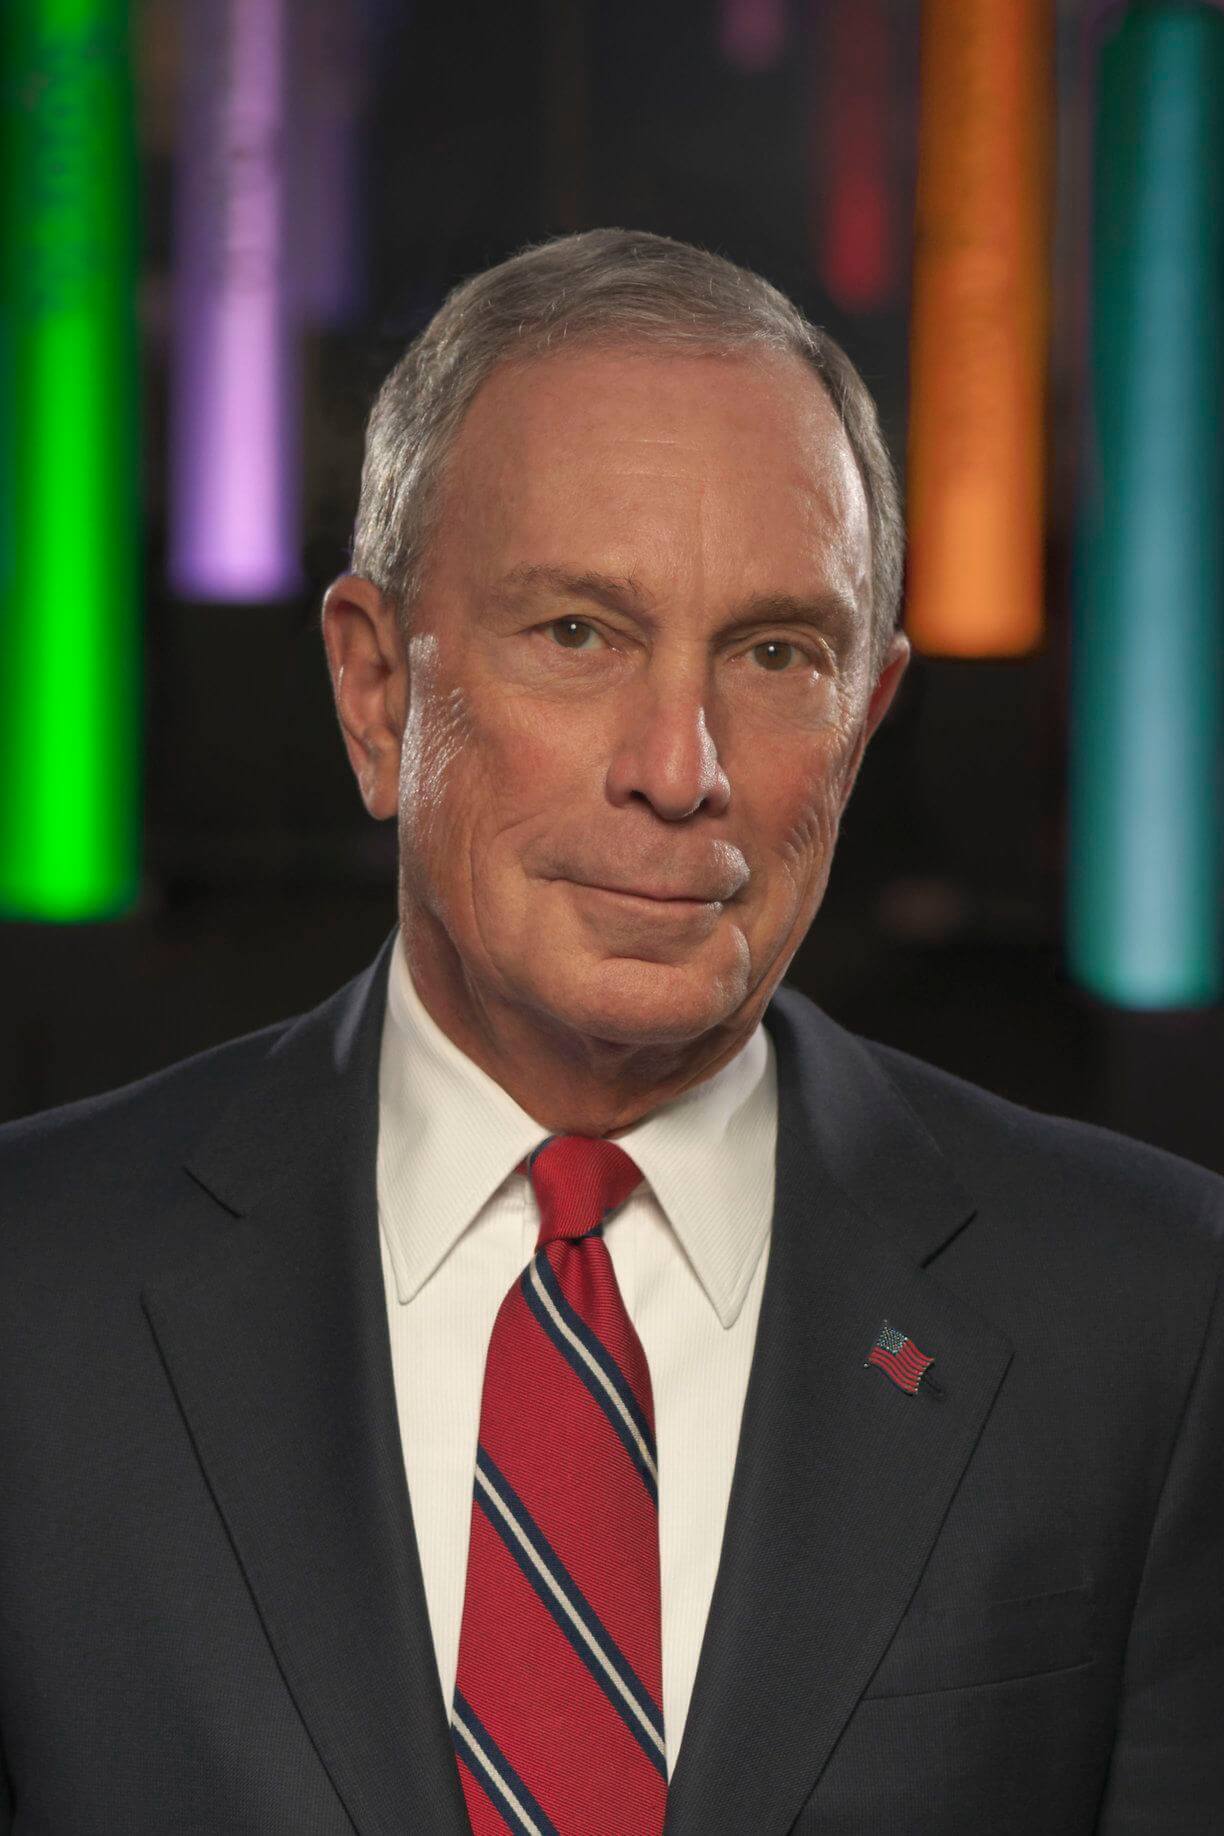 The issue of crypto regulation has been raised by Michael Bloomberg